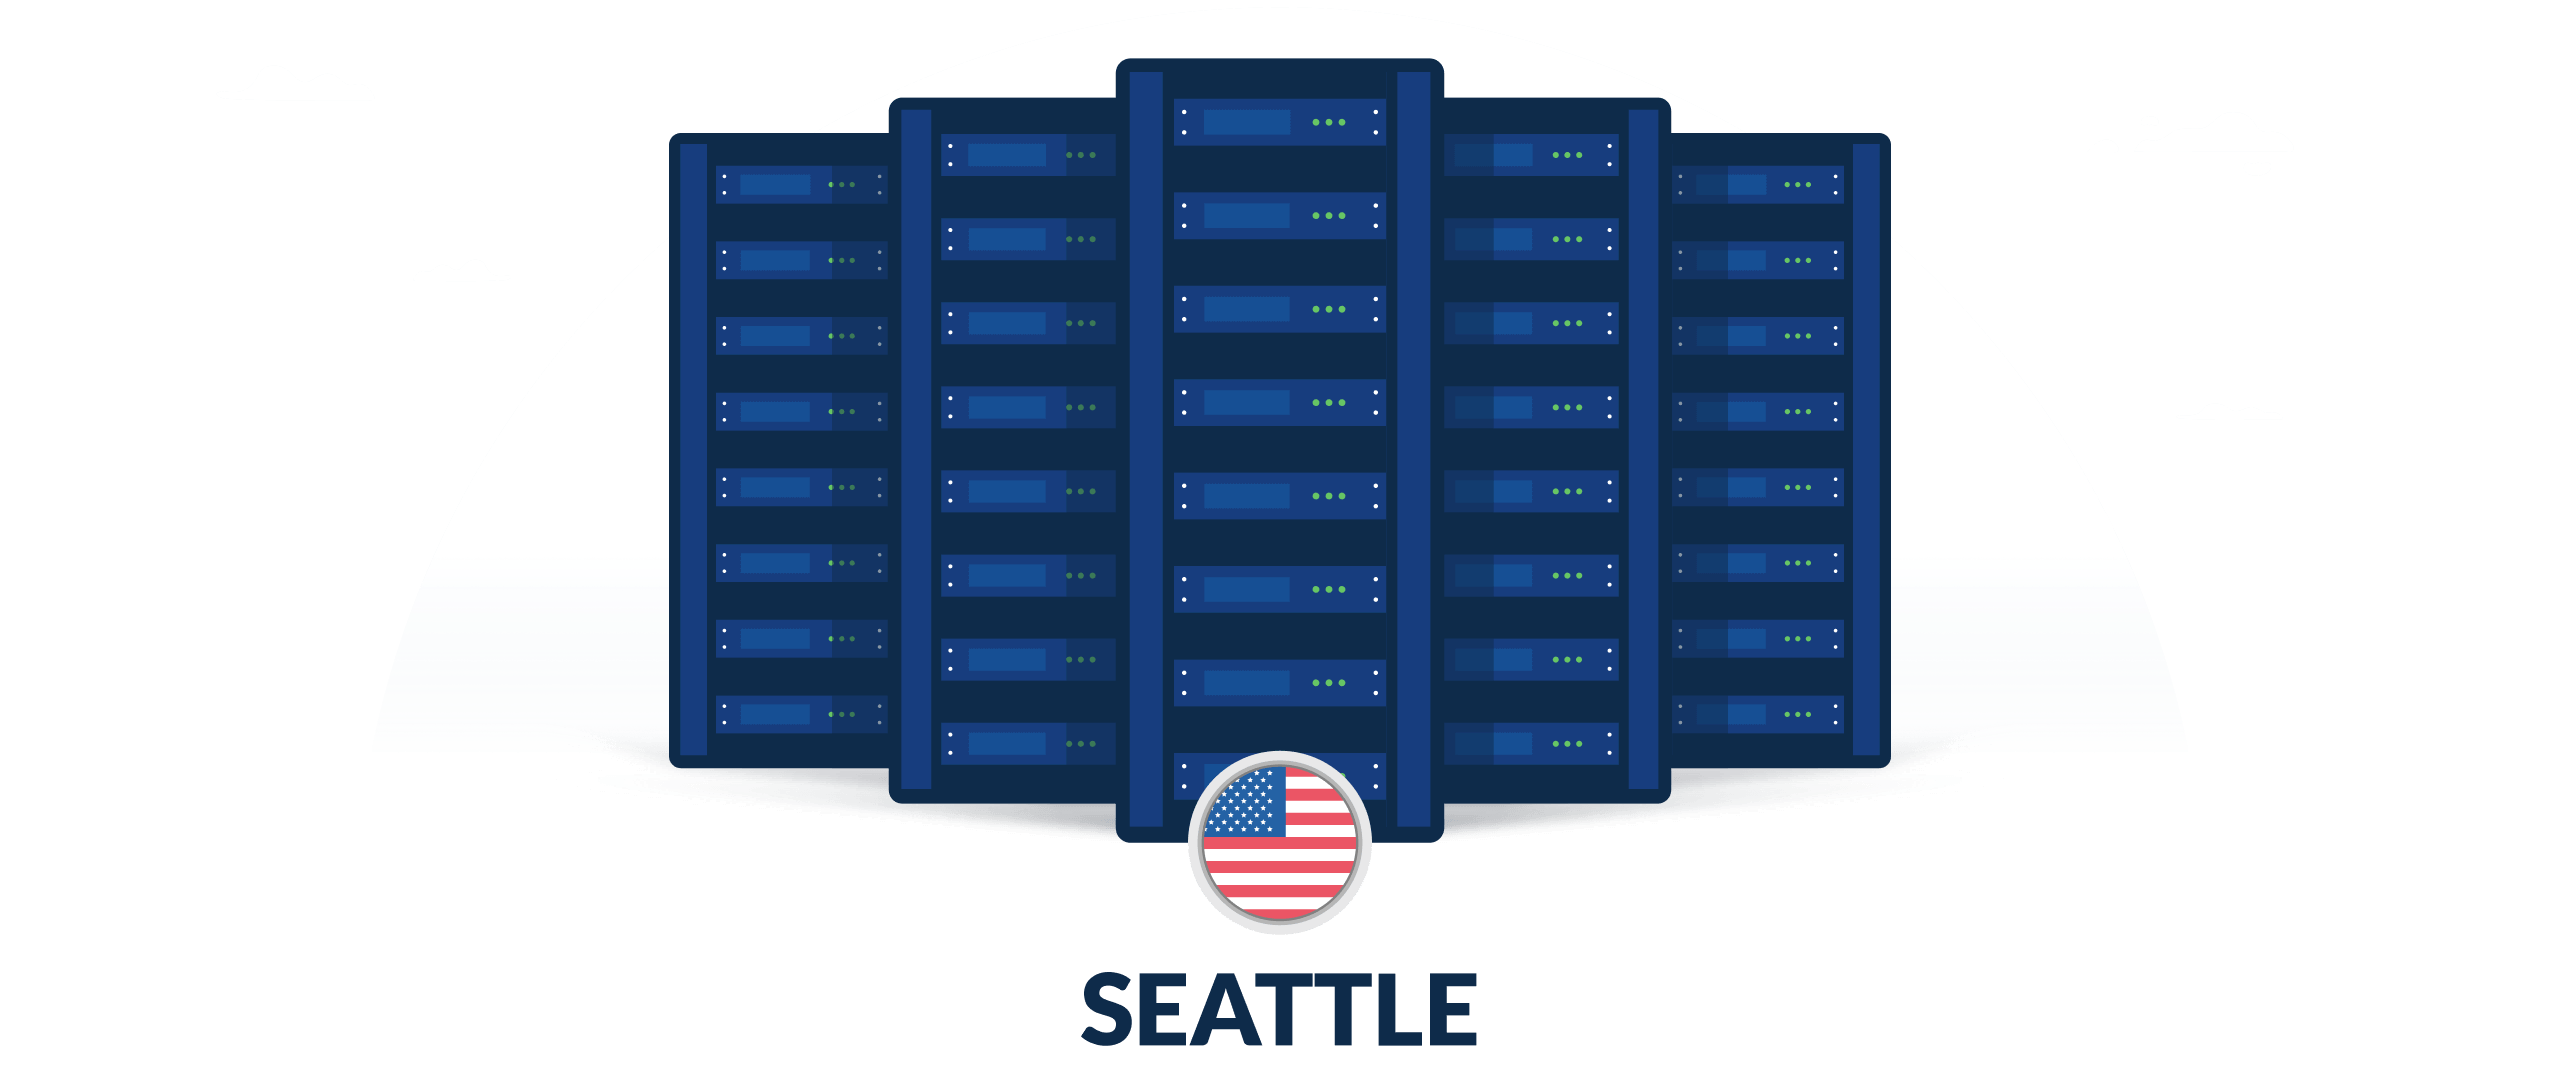 VPN servers in Seattle, United States